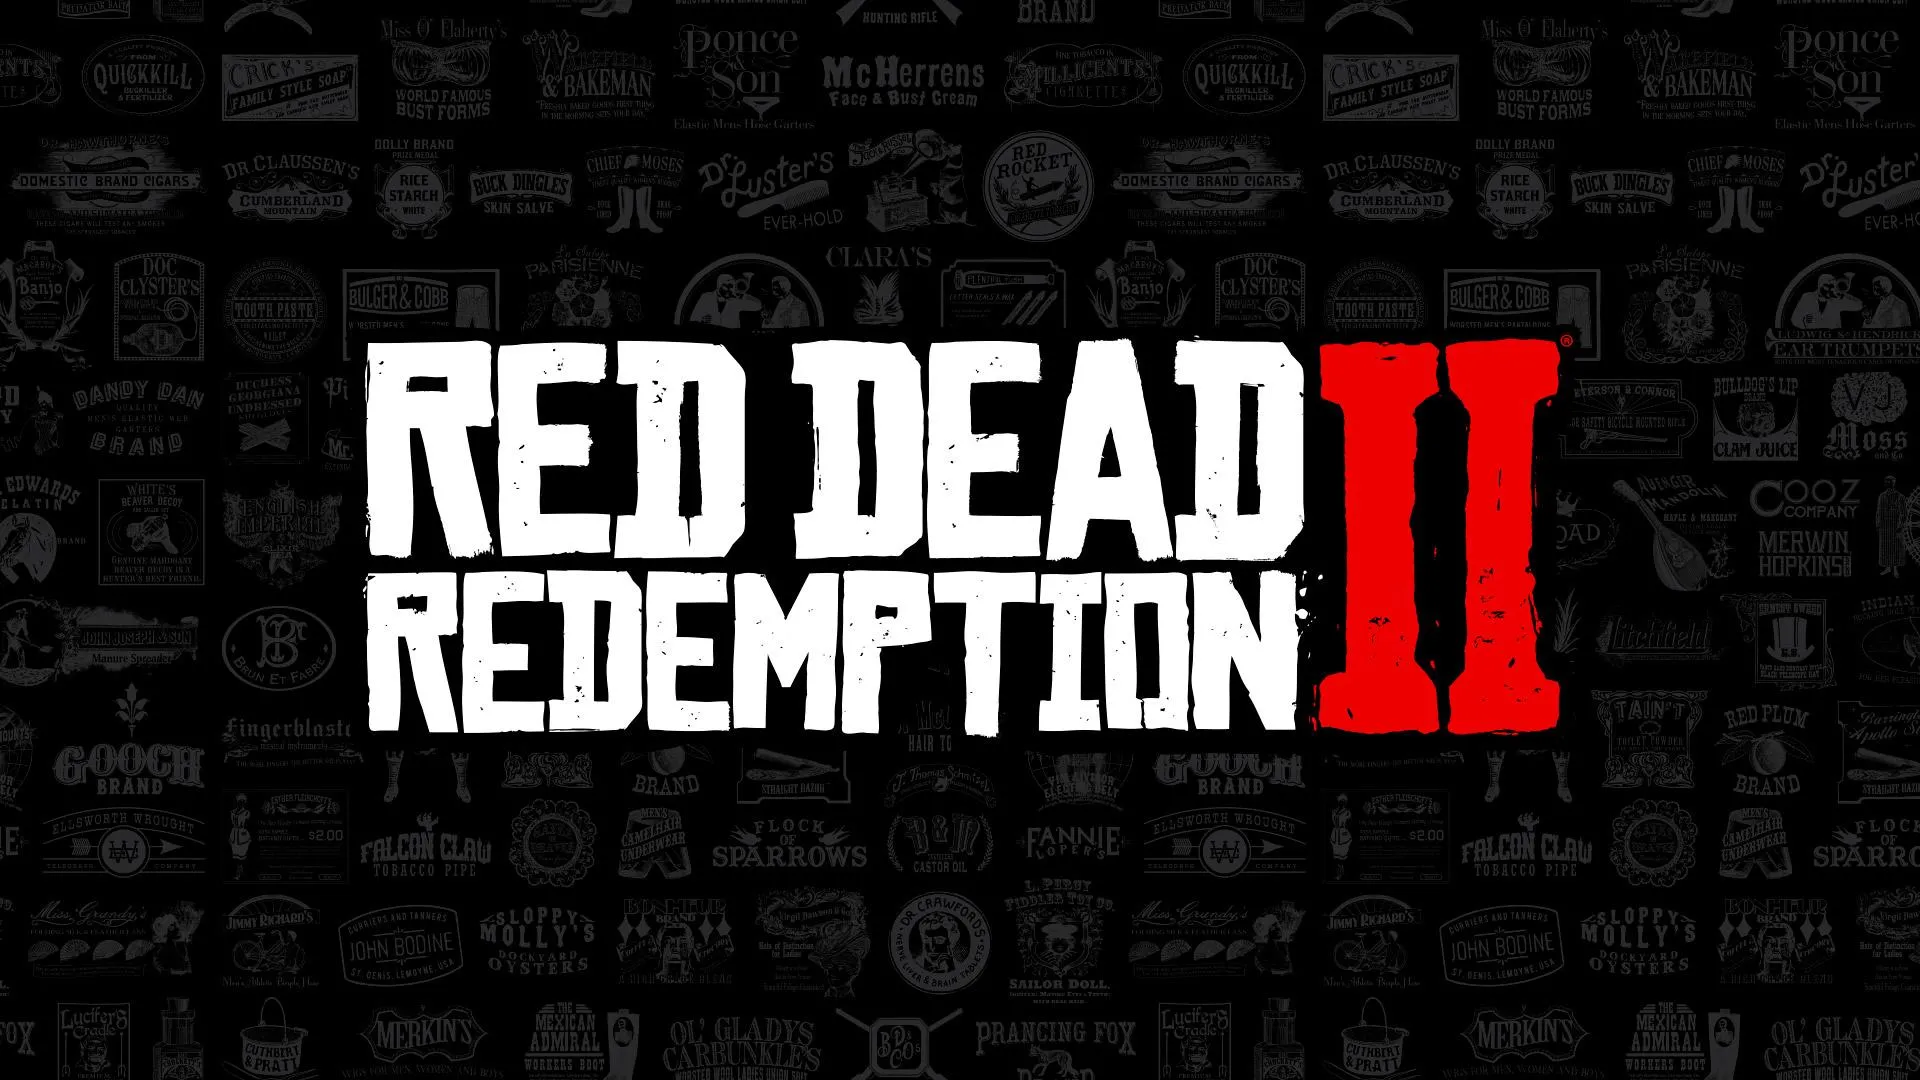 Limited-Edition Red Dead Redemption 2 Gear and Collectibles Coming Soon